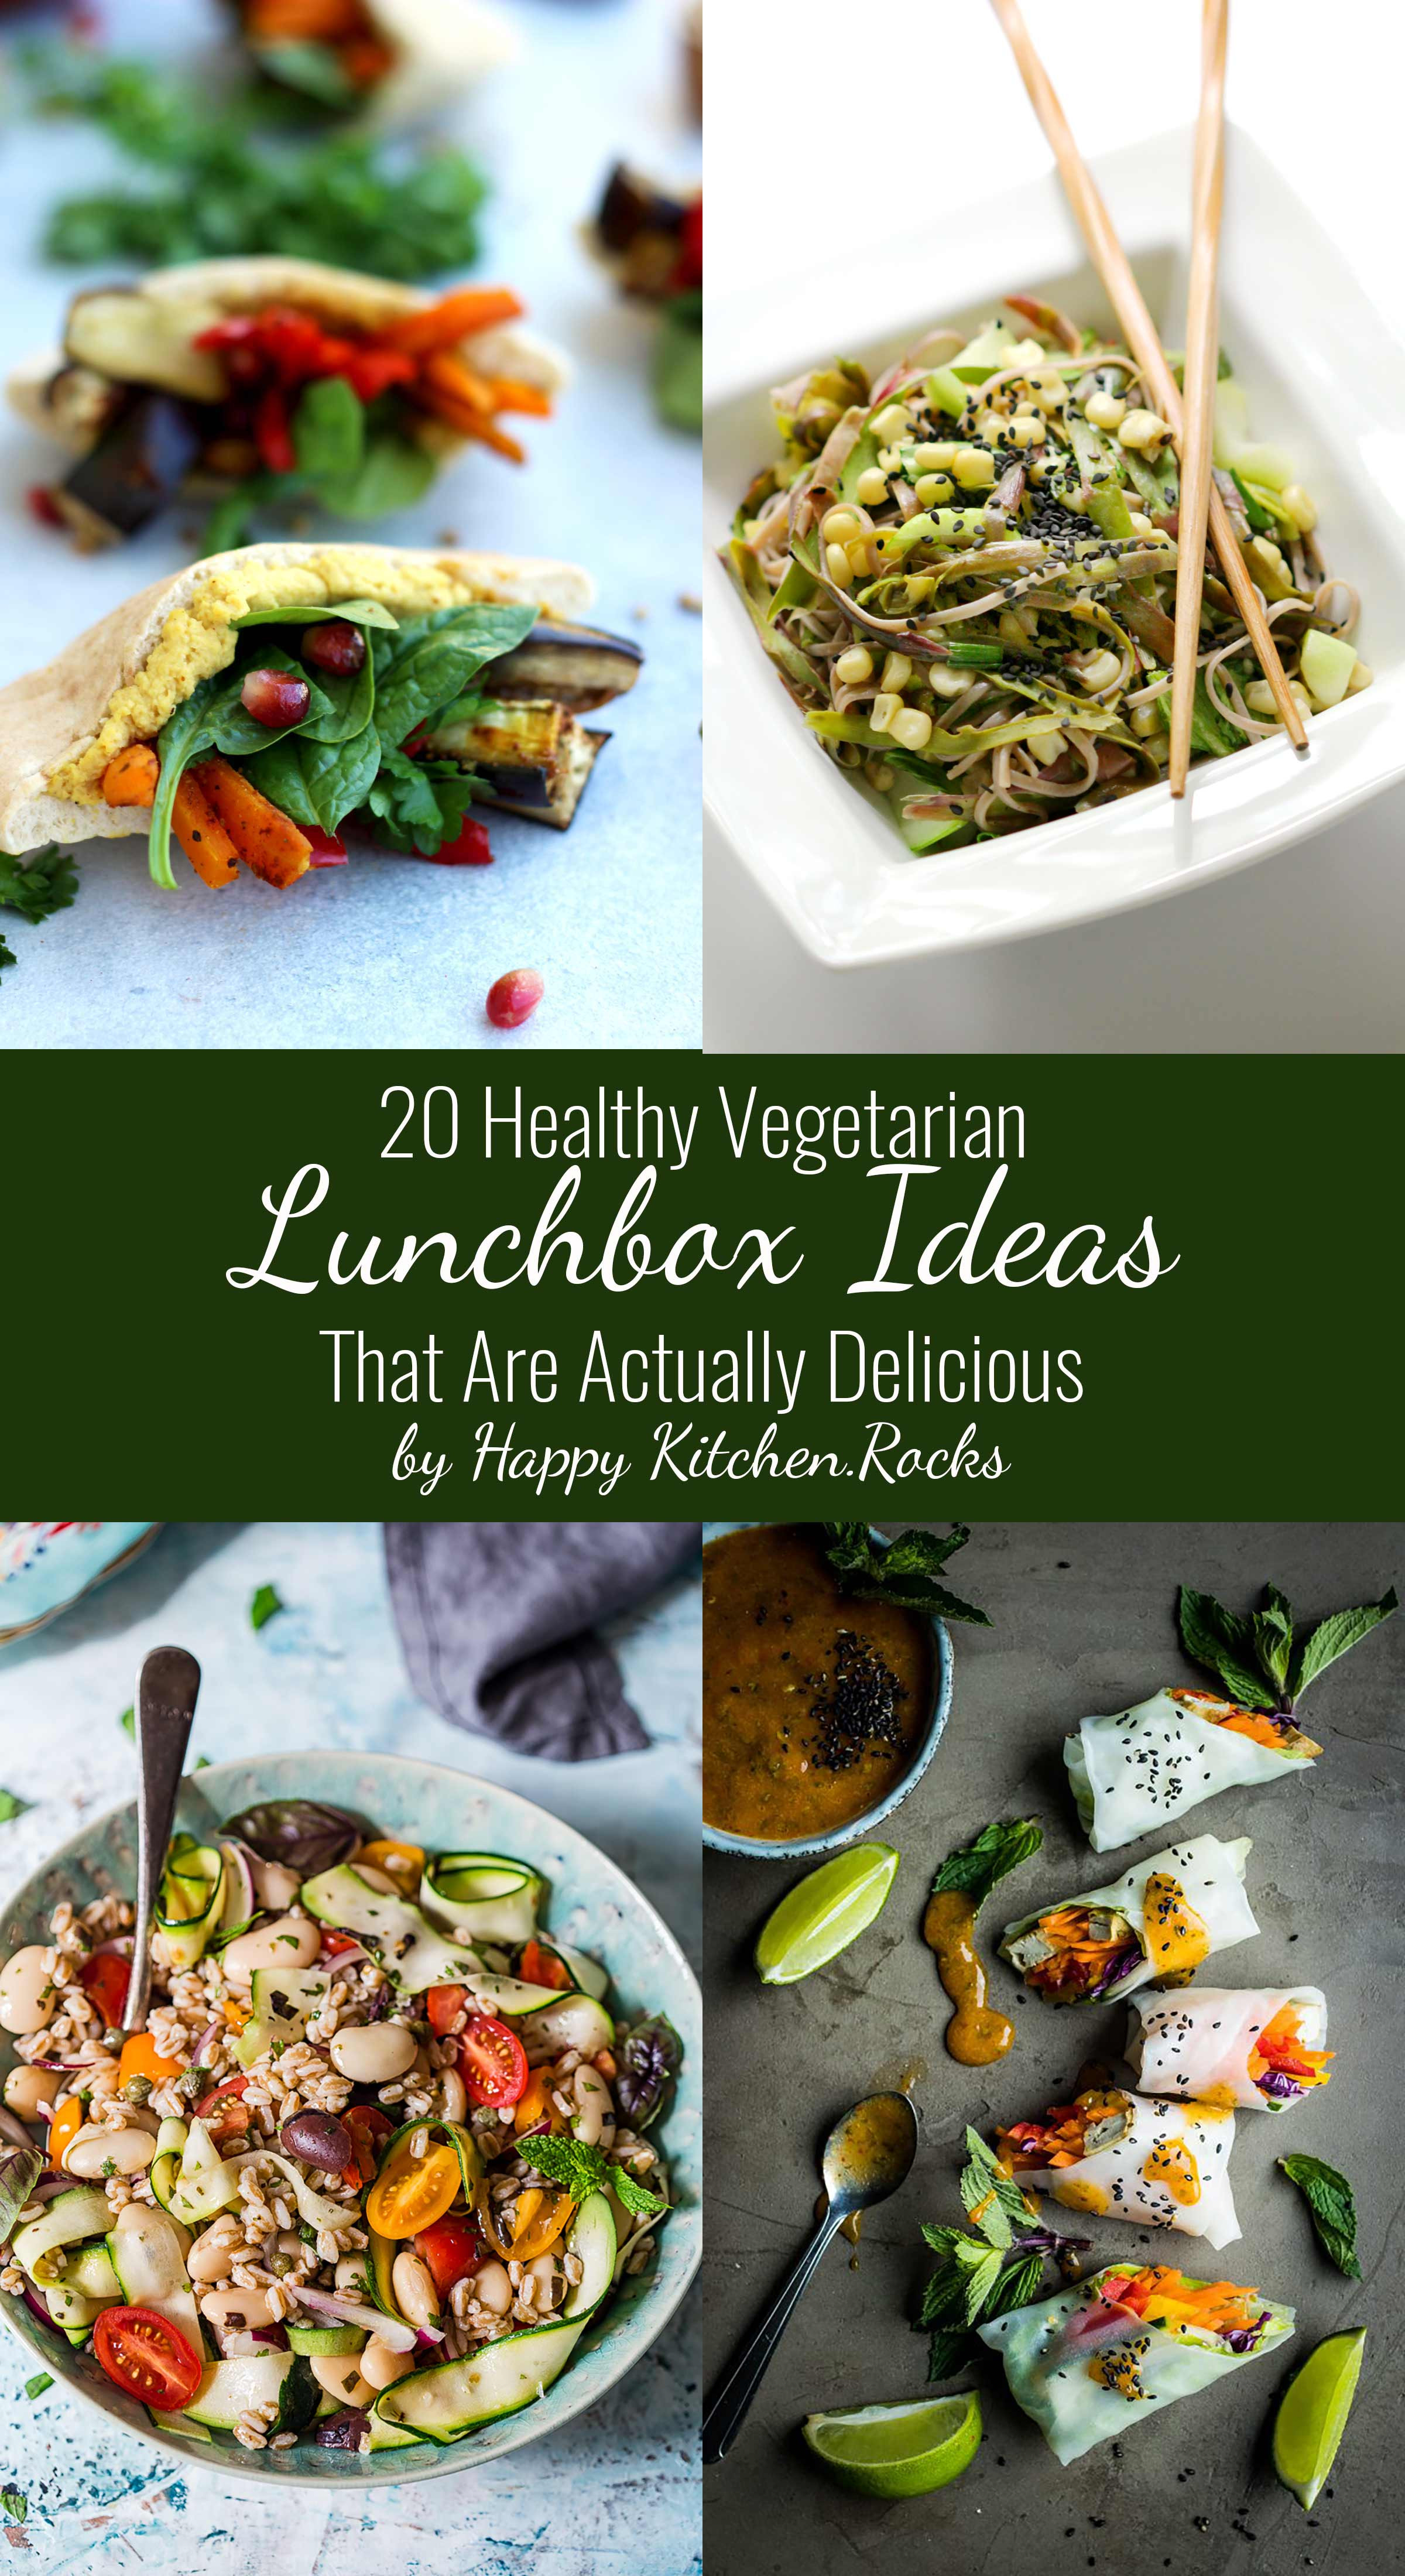 Healthy Vegetarian Lunches
 20 Healthy Ve arian Lunchbox Ideas That Are Actually